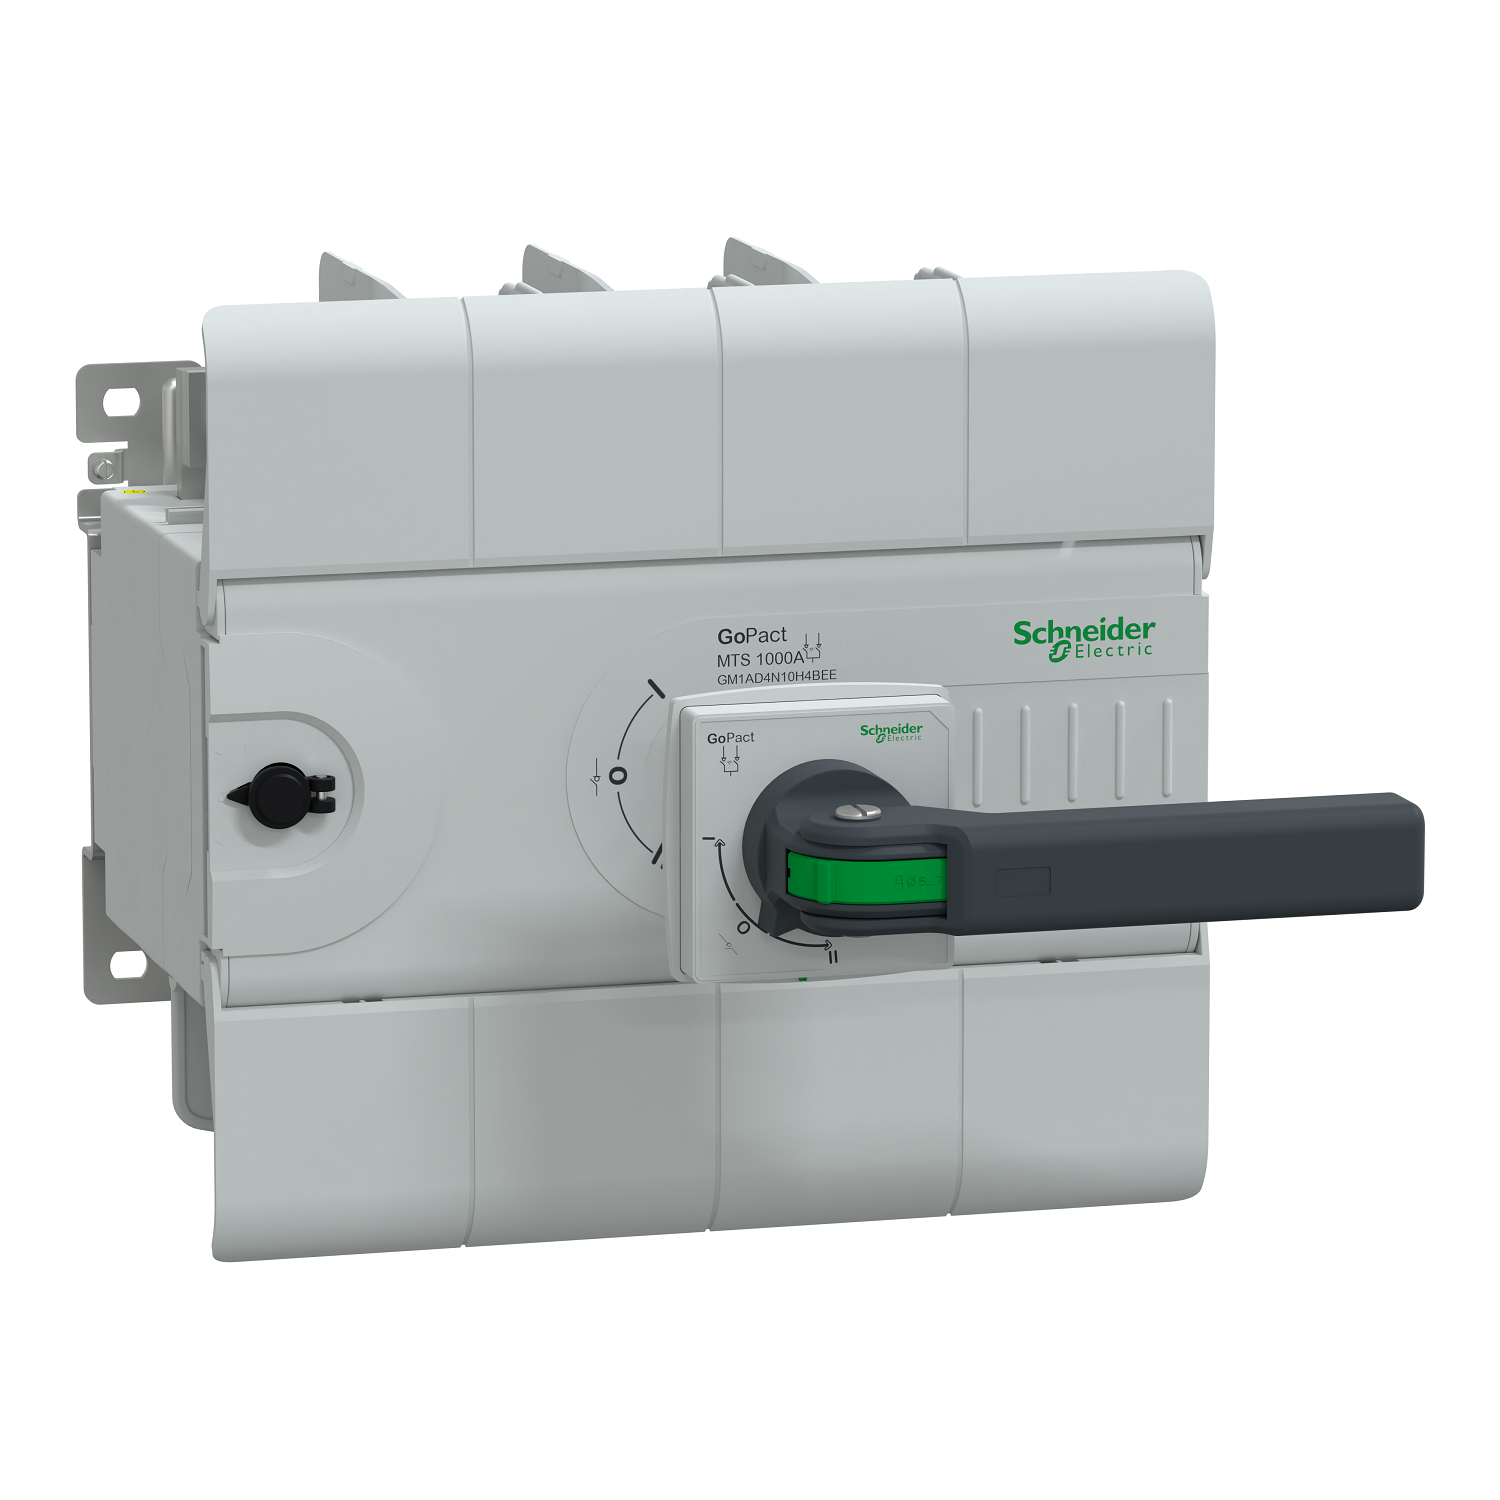 Manual transfer switch, GoPact MTS 1000, 4 poles, 1000A, 415VAC 50/60Hz, extended rotary handle, open transition